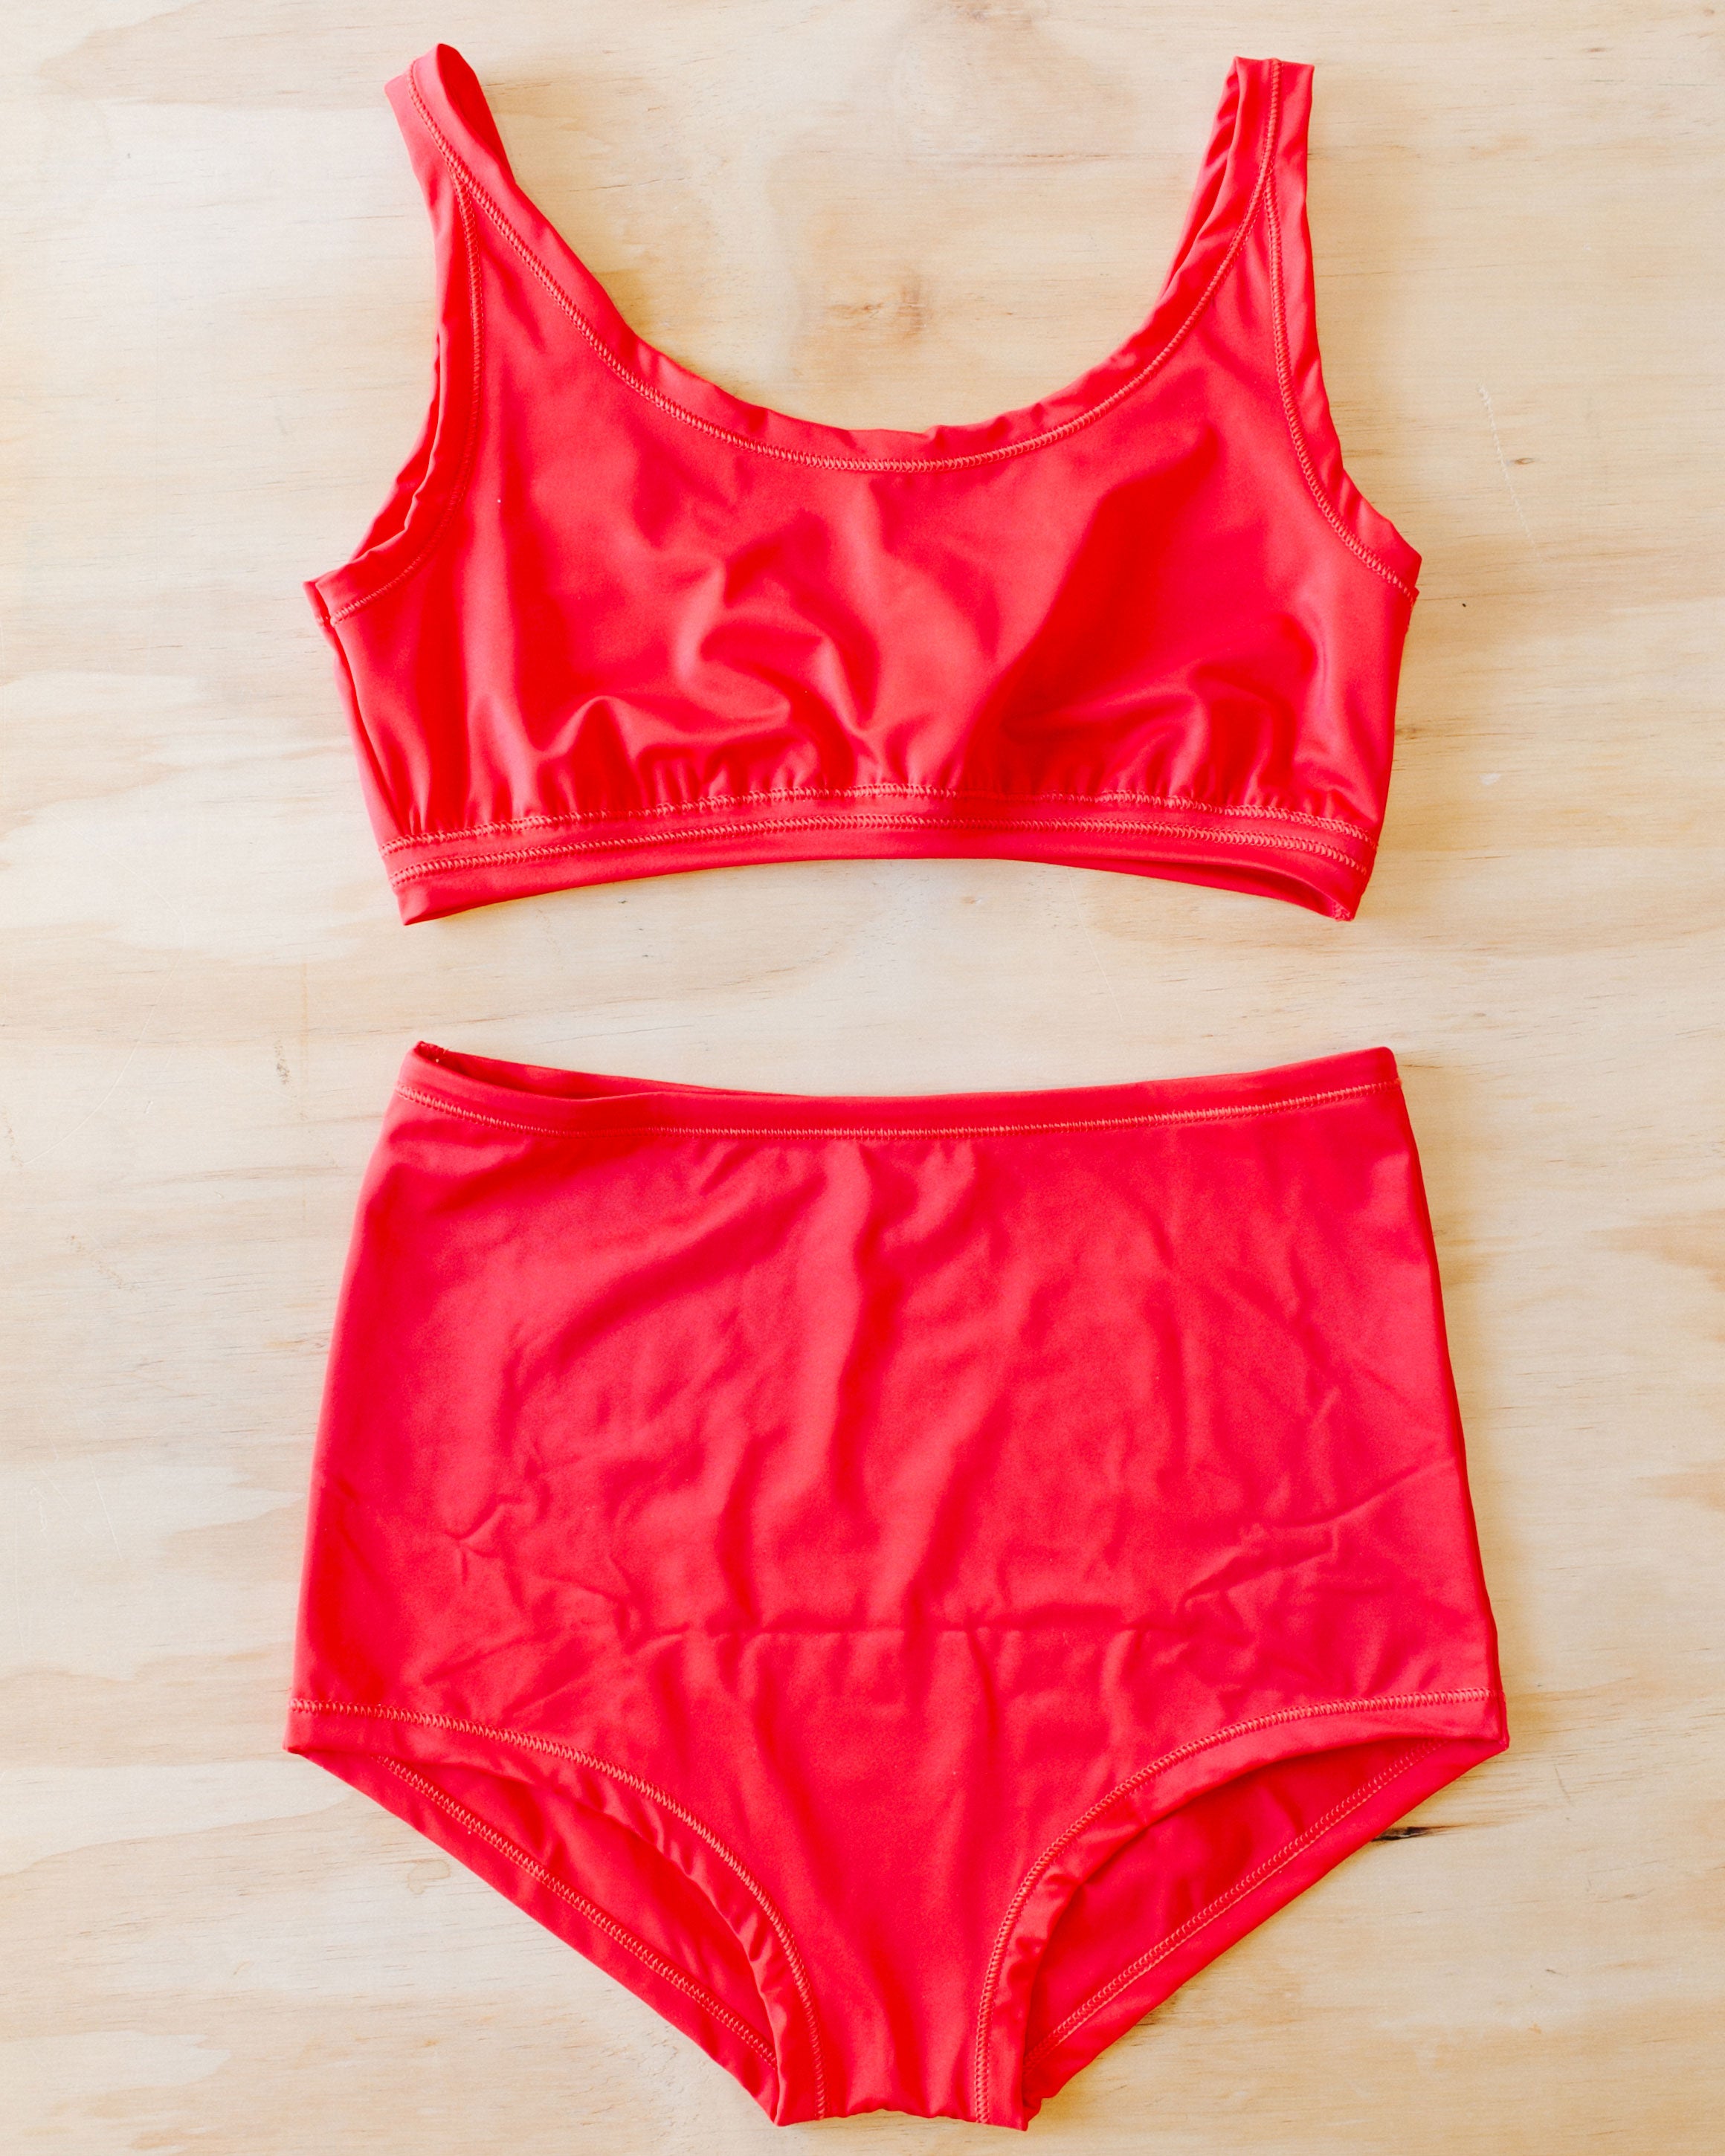 Flat lay on a wood surface of a Swimwear set with Sky Rise style bottoms in Classic Red.